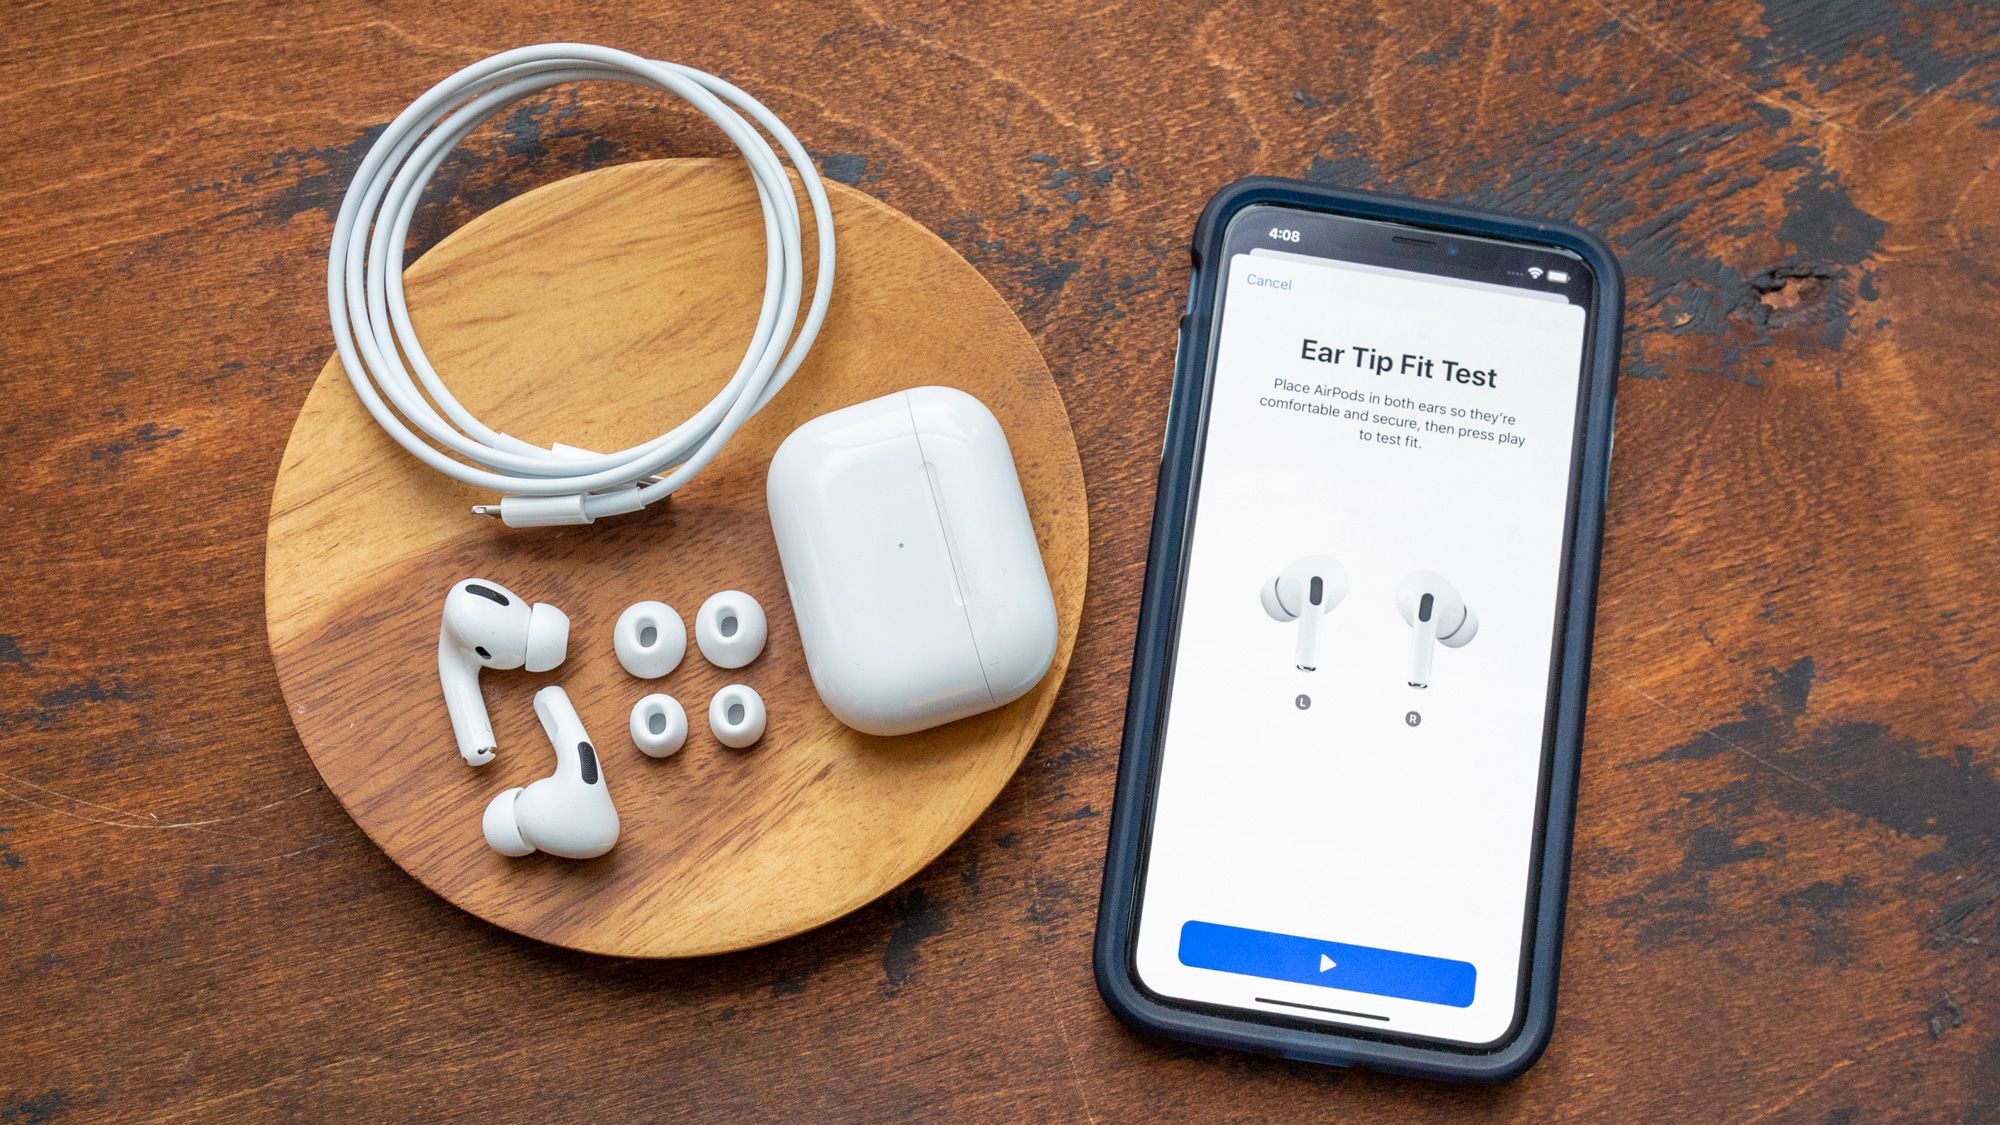 ihærdige halskæde ikke How to reset your AirPods and AirPods Pro | Laptop Mag